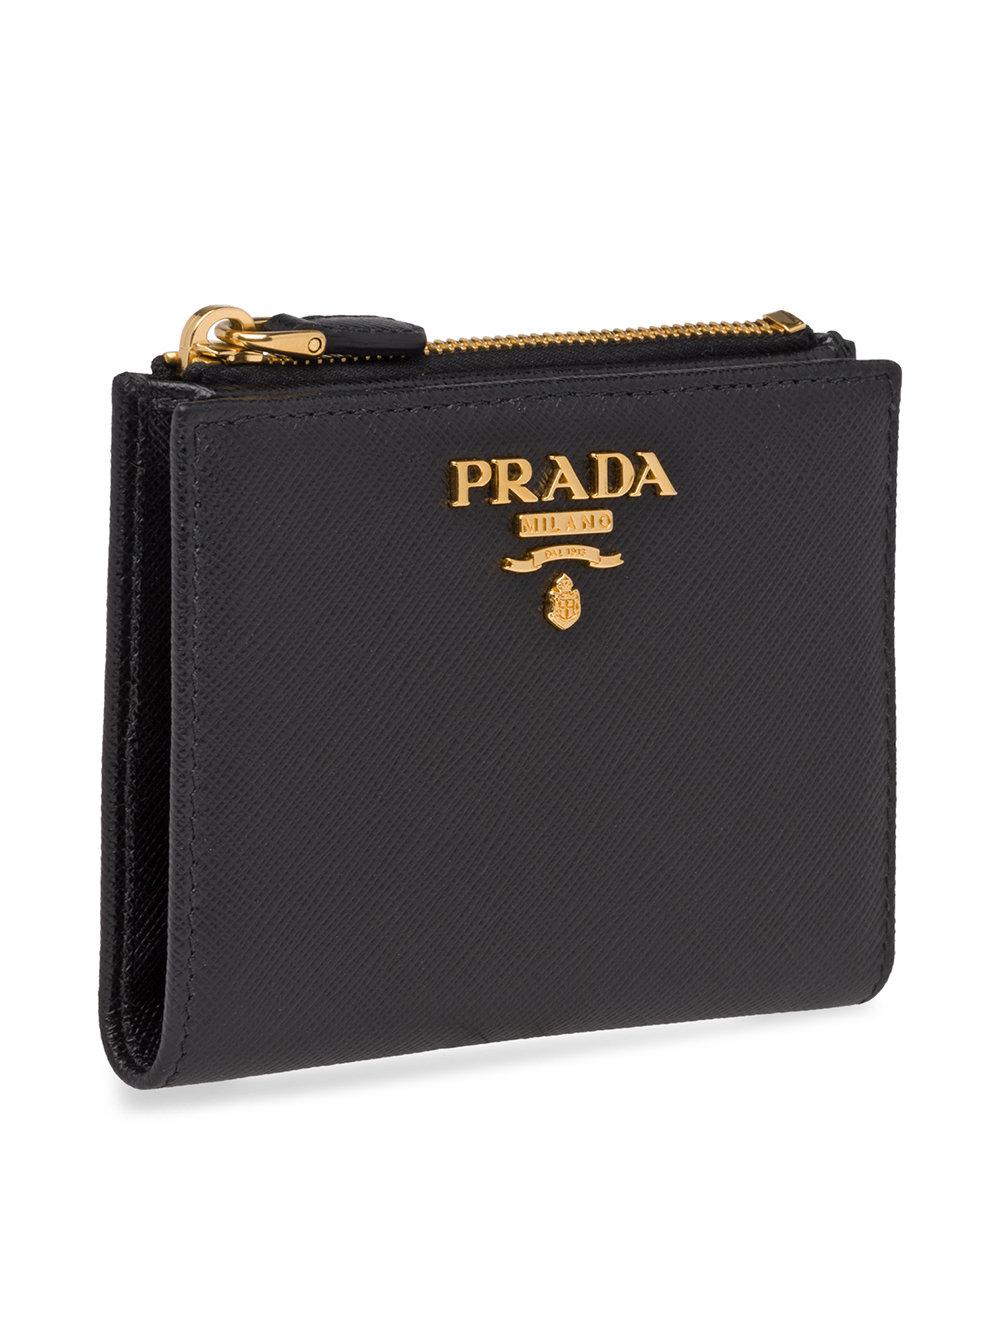 Prada Leather Compact Wallet in Black - Lyst